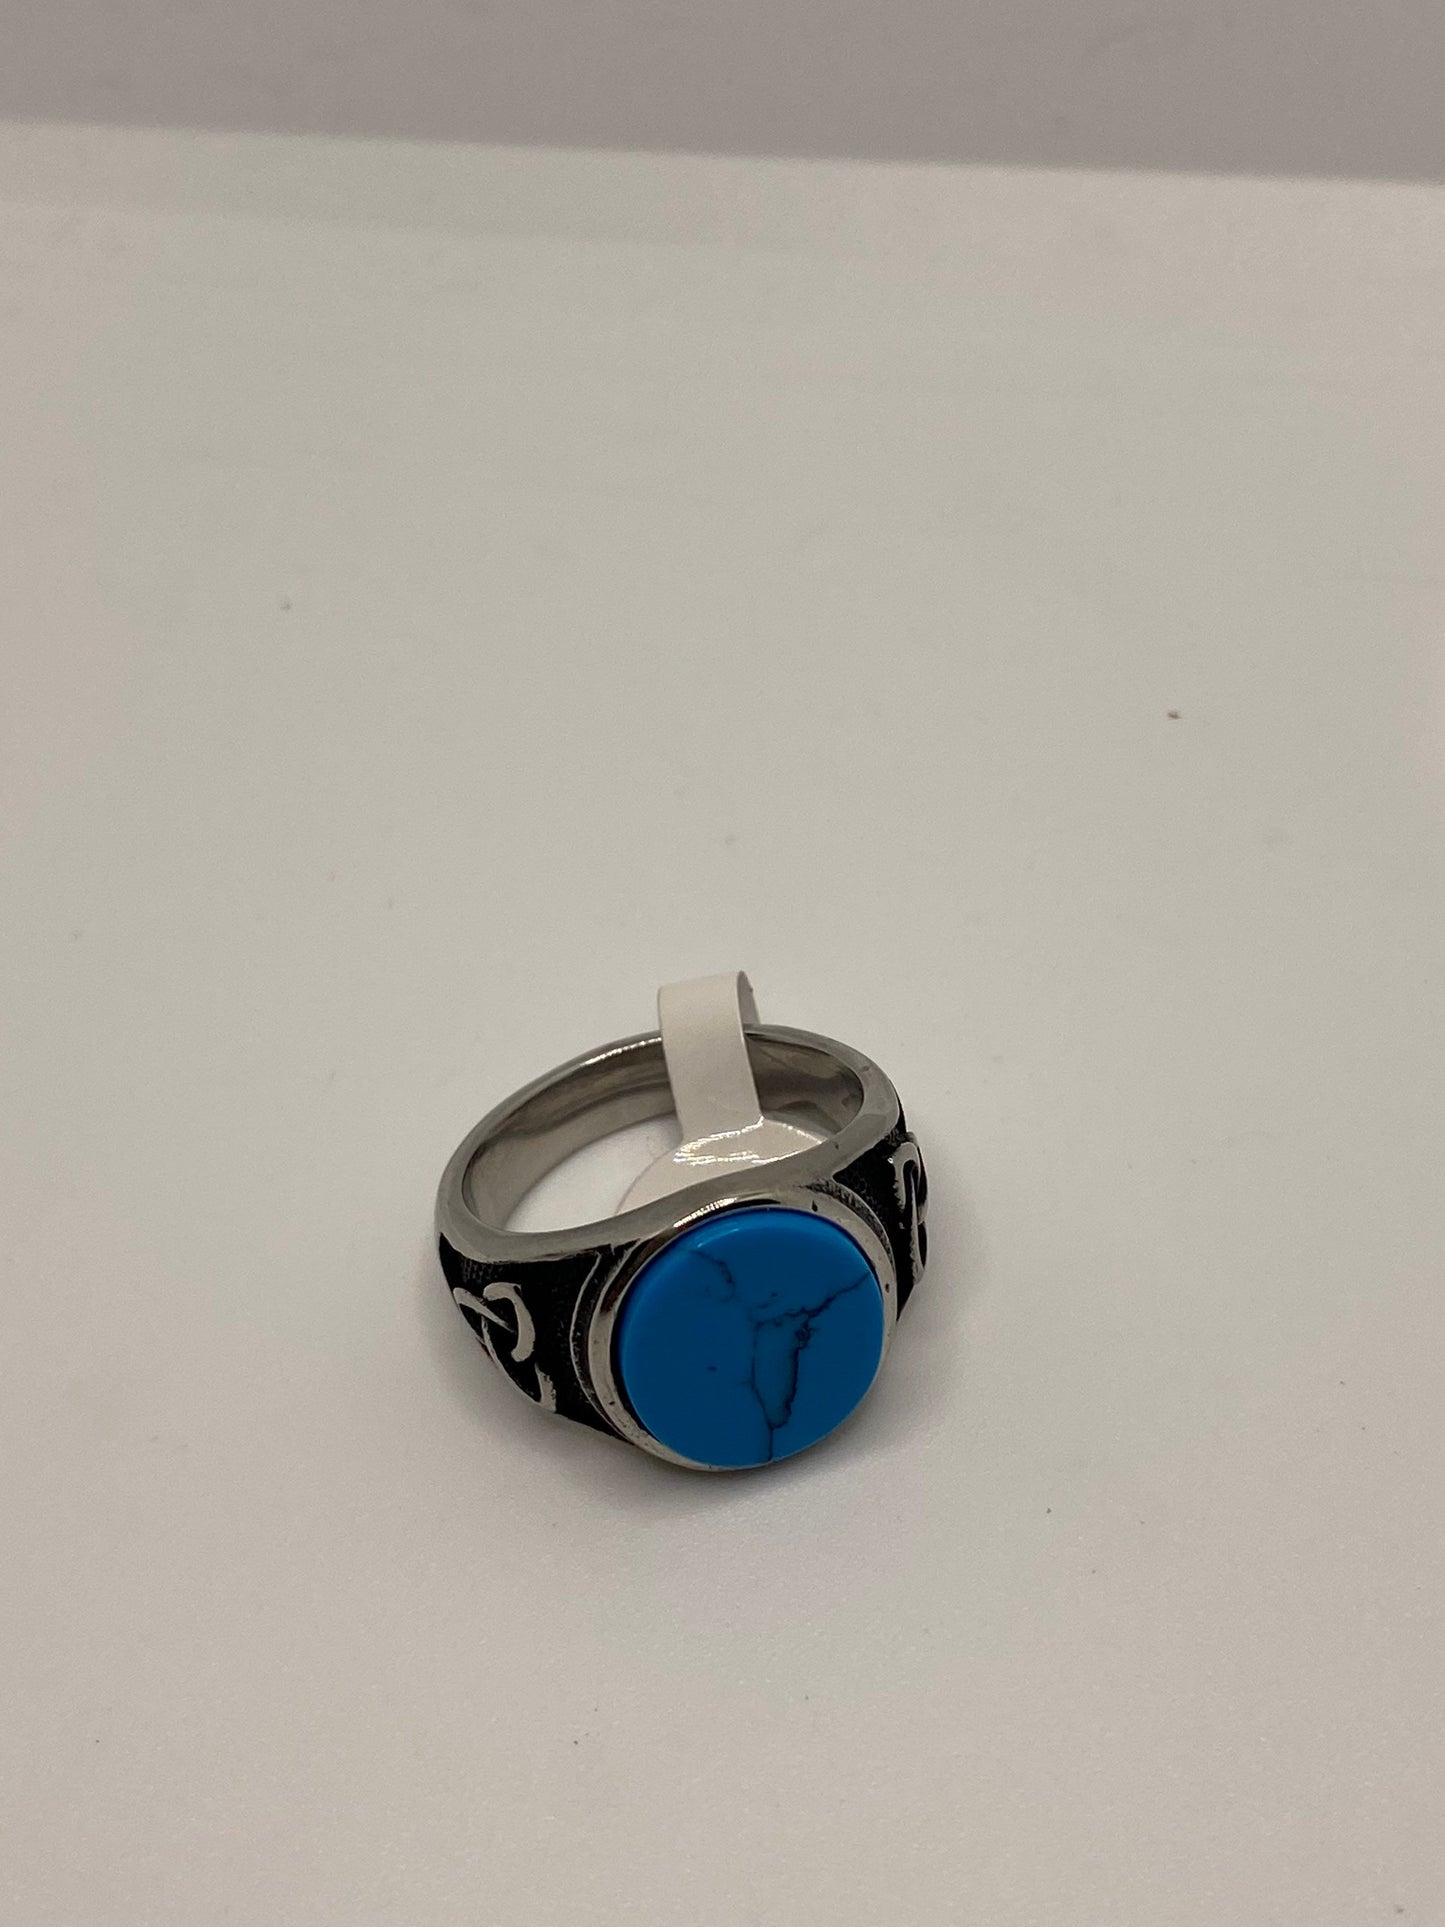 Vintage Celtic Blue Turquoise Stainless Steel Mens Ring